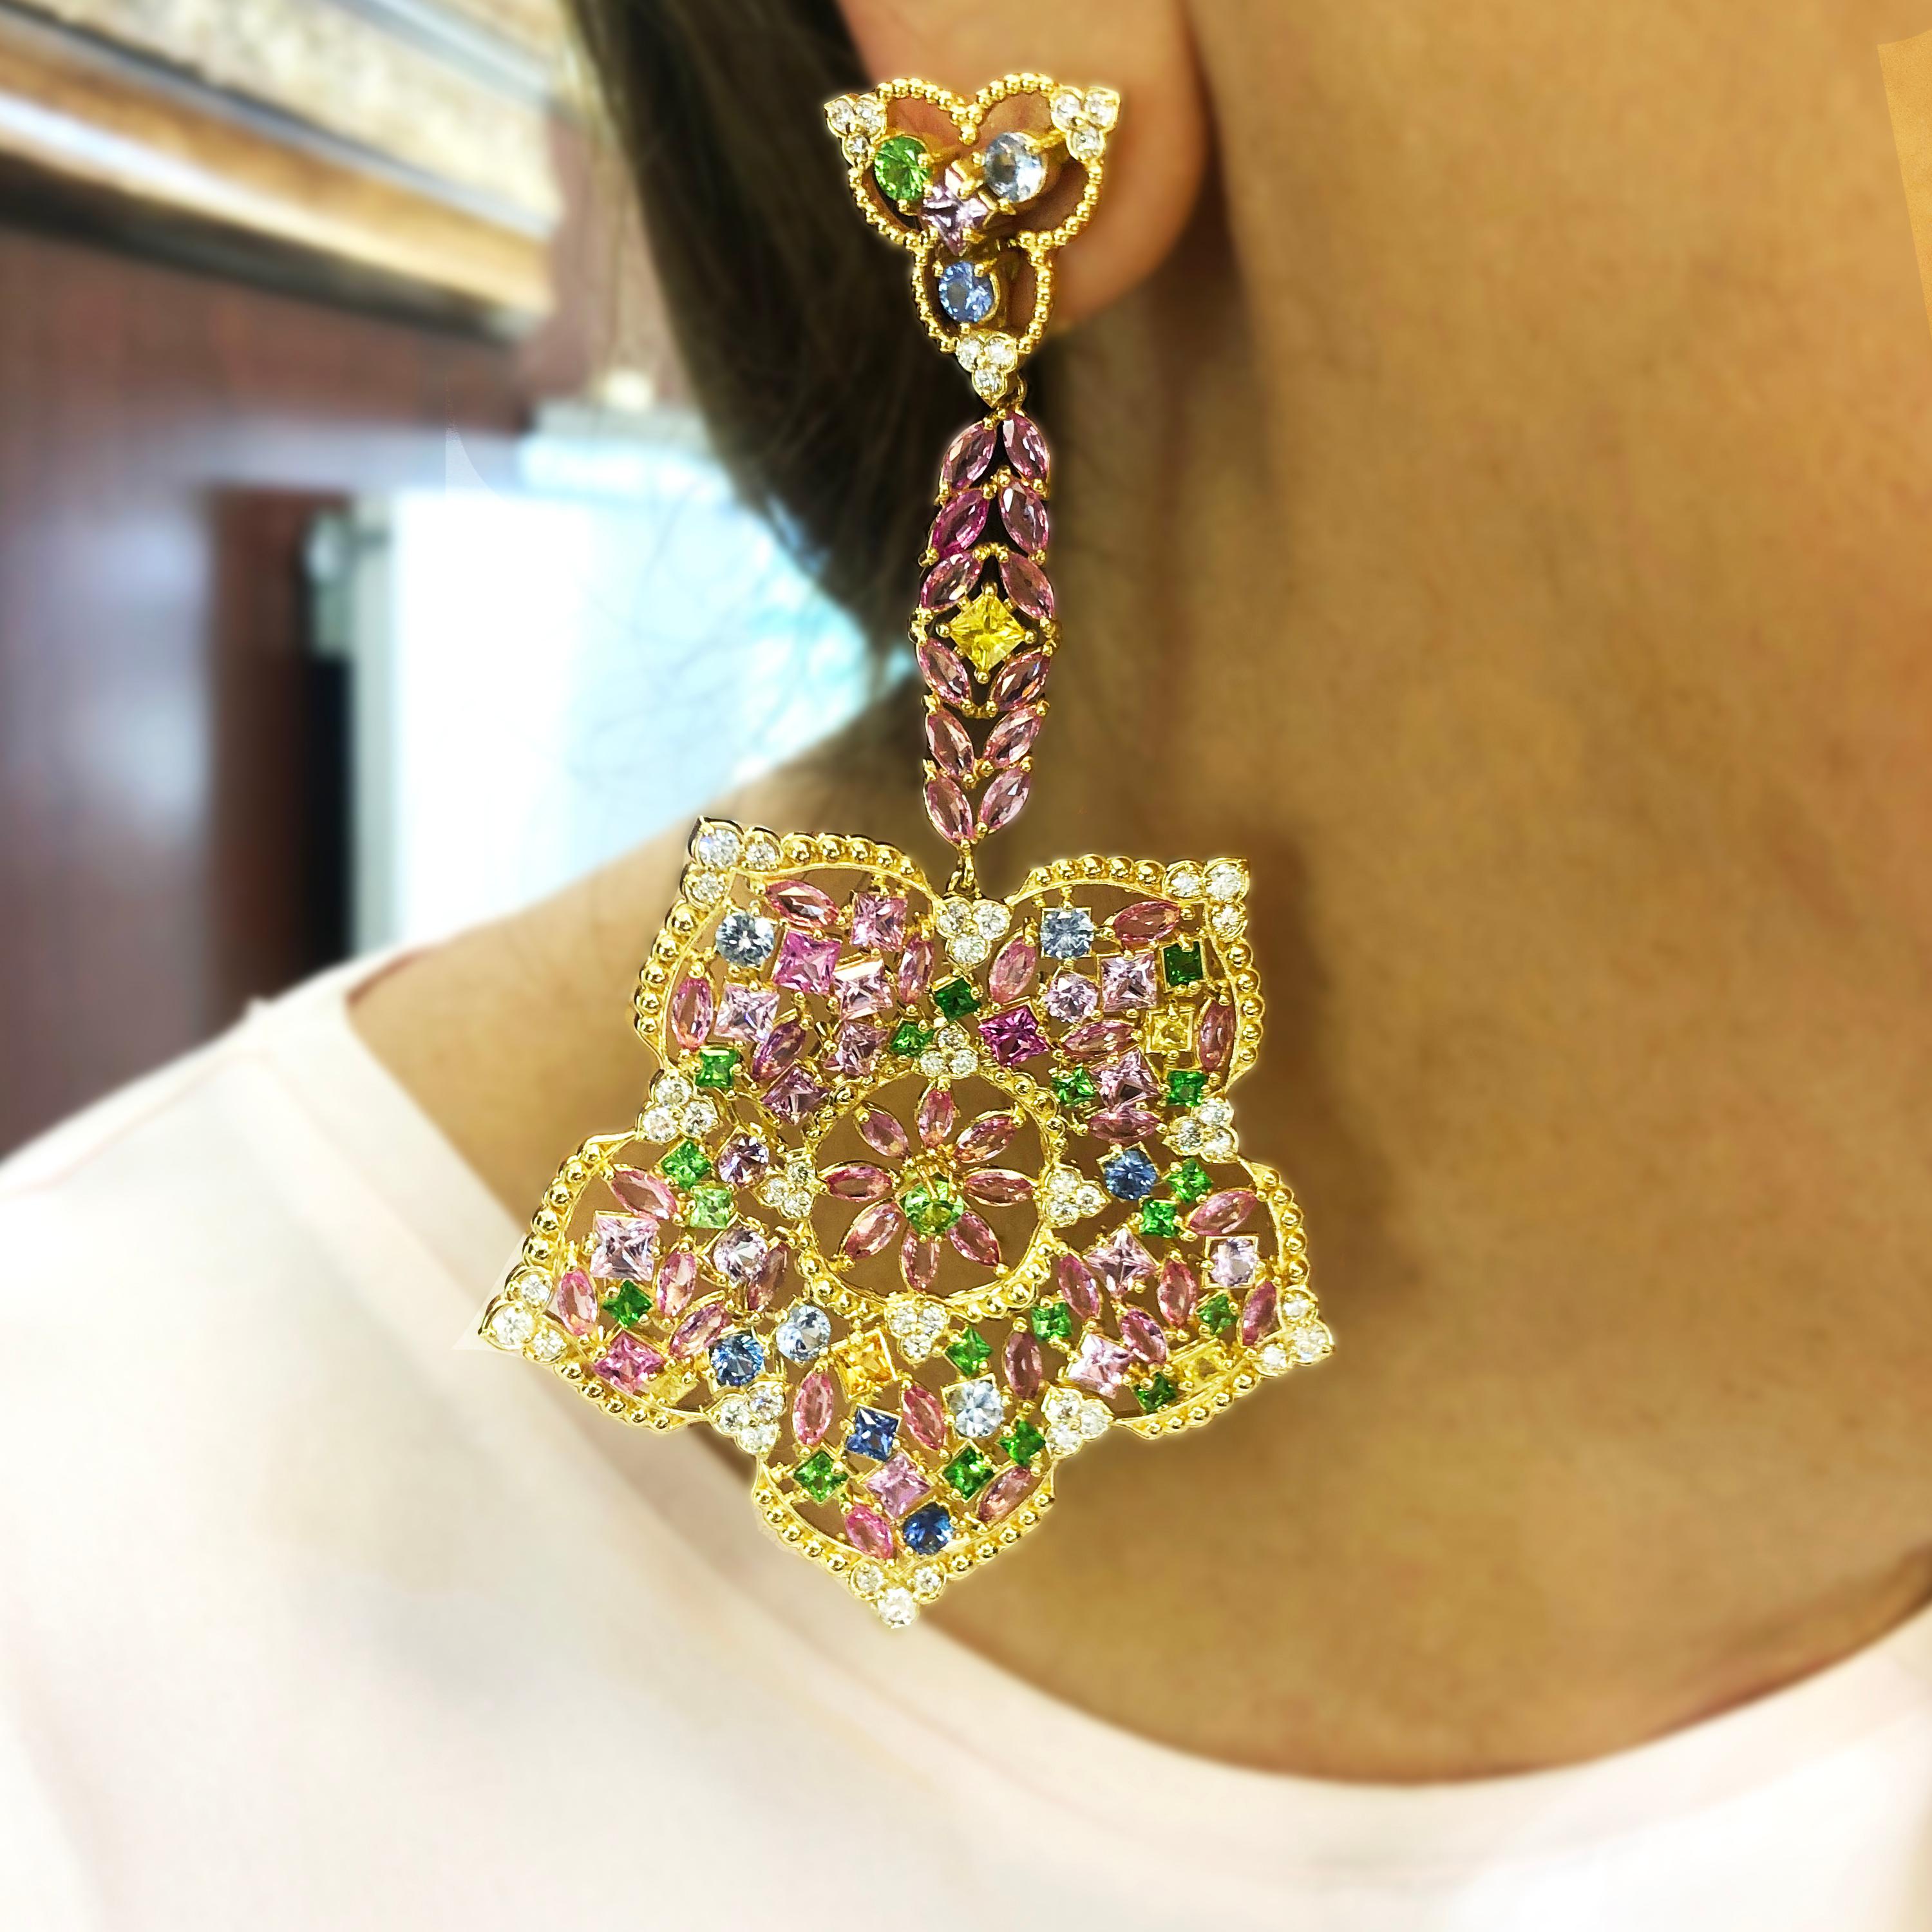 Stambolian 18K Gold Diamond Multi Color Sapphire Floral Motif Drop Earrings

NO RESERVE PRICE

This state of the art earrings is from the 2021 